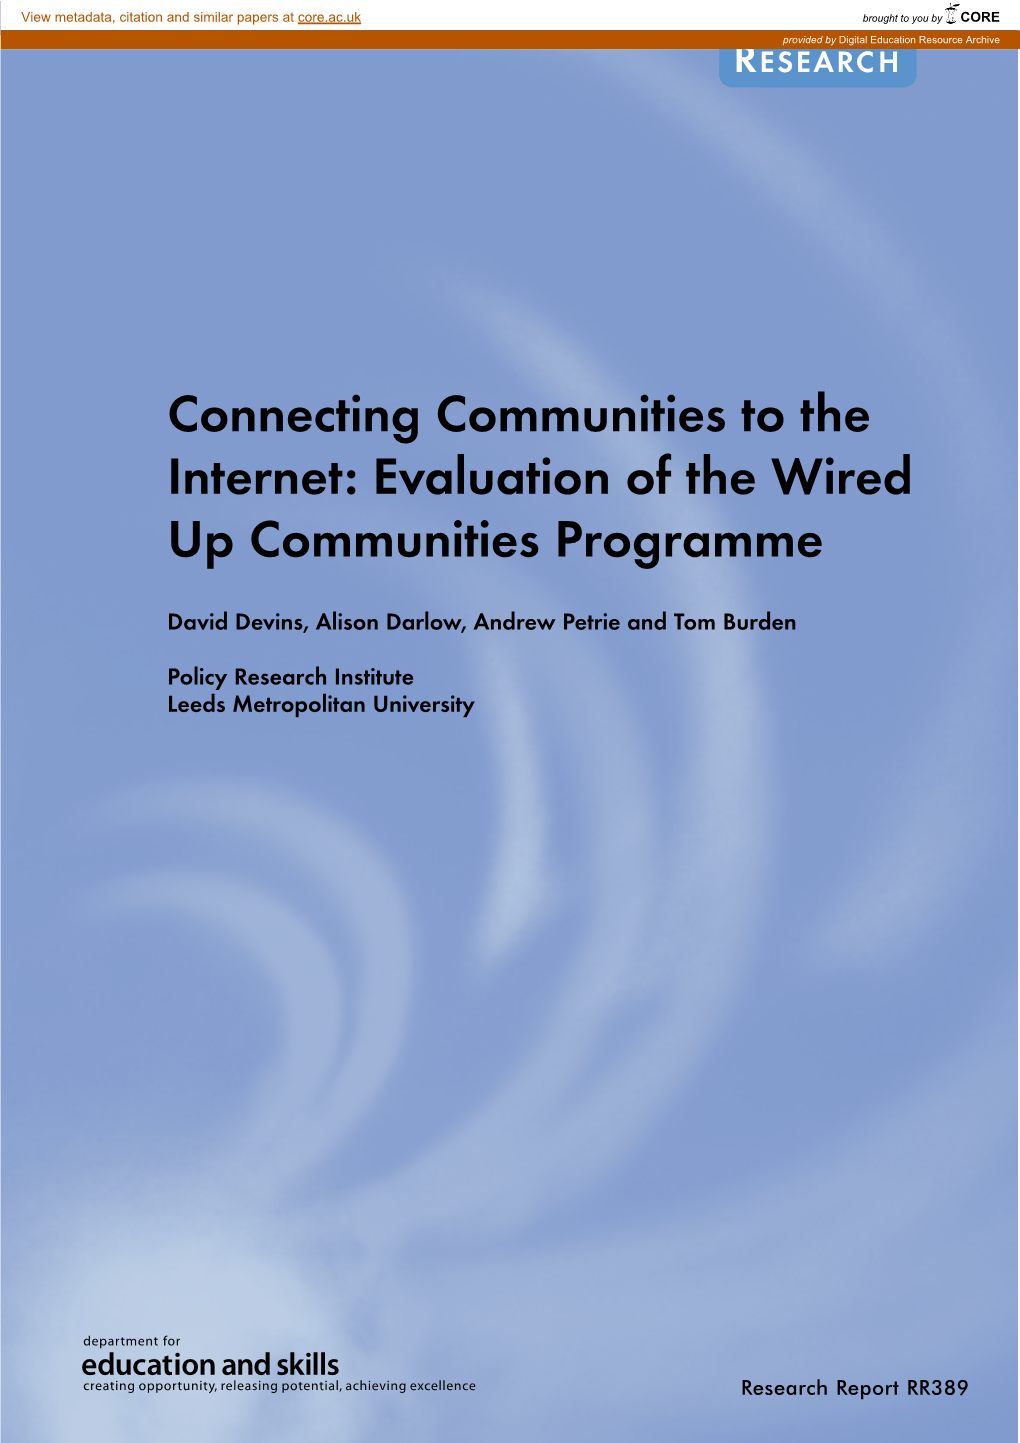 Evaluation of the Wired up Communities Programme